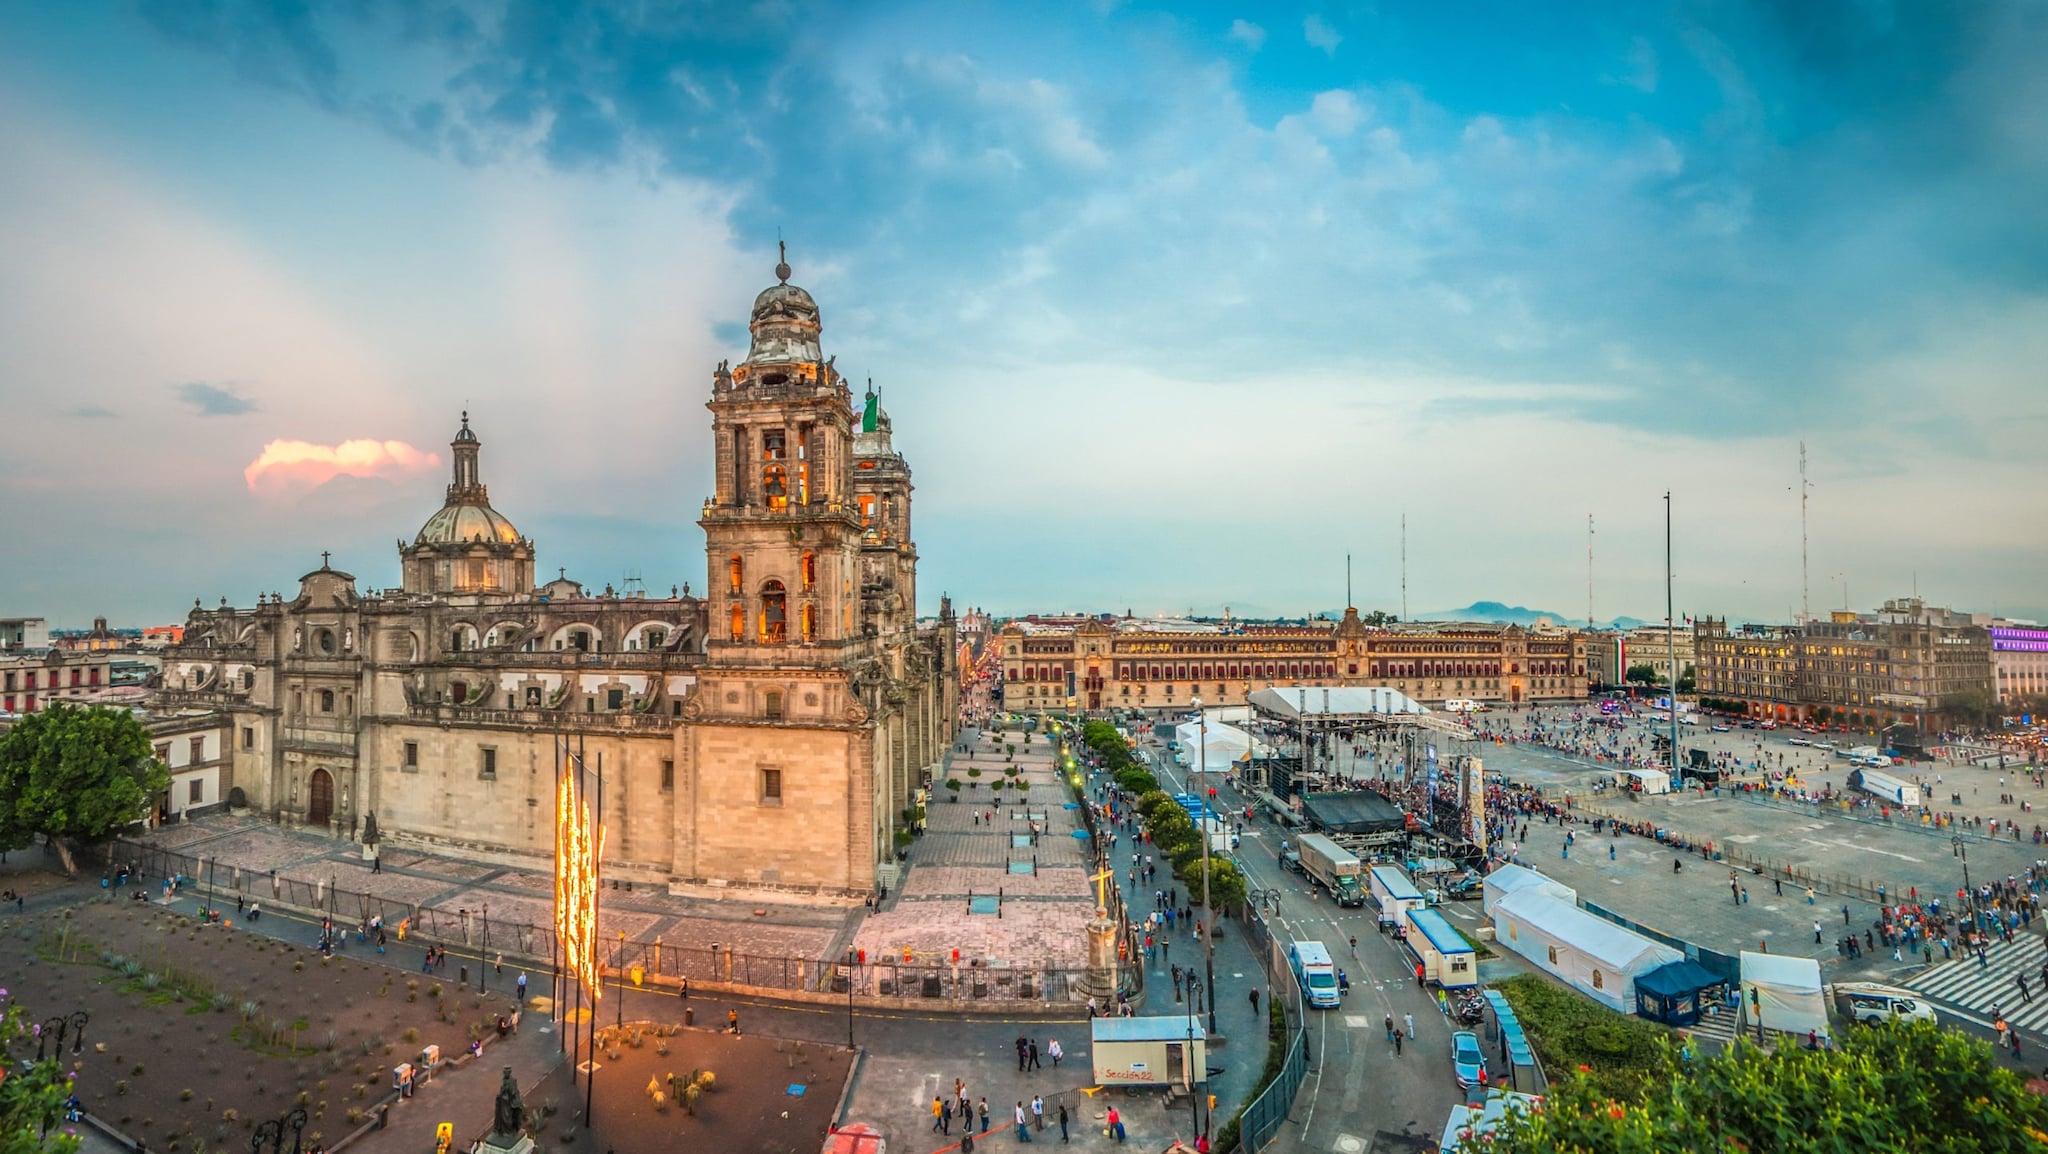 Zocalo Square and Metropolitan Cathedral of Mexico City.